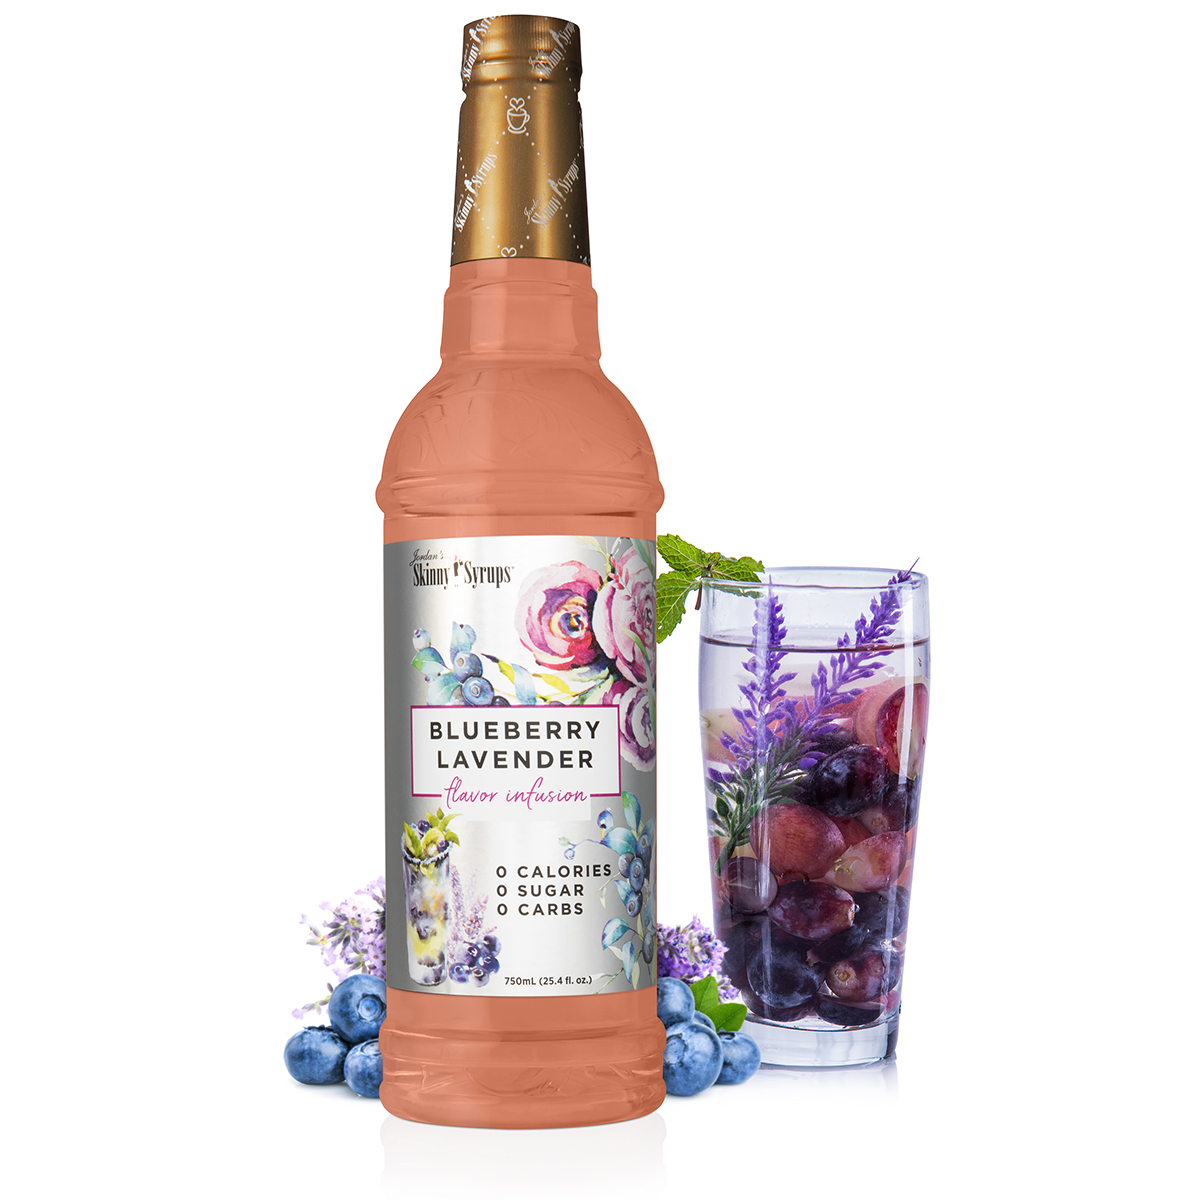 Blueberry Lavender Flavor Infusion Syrup